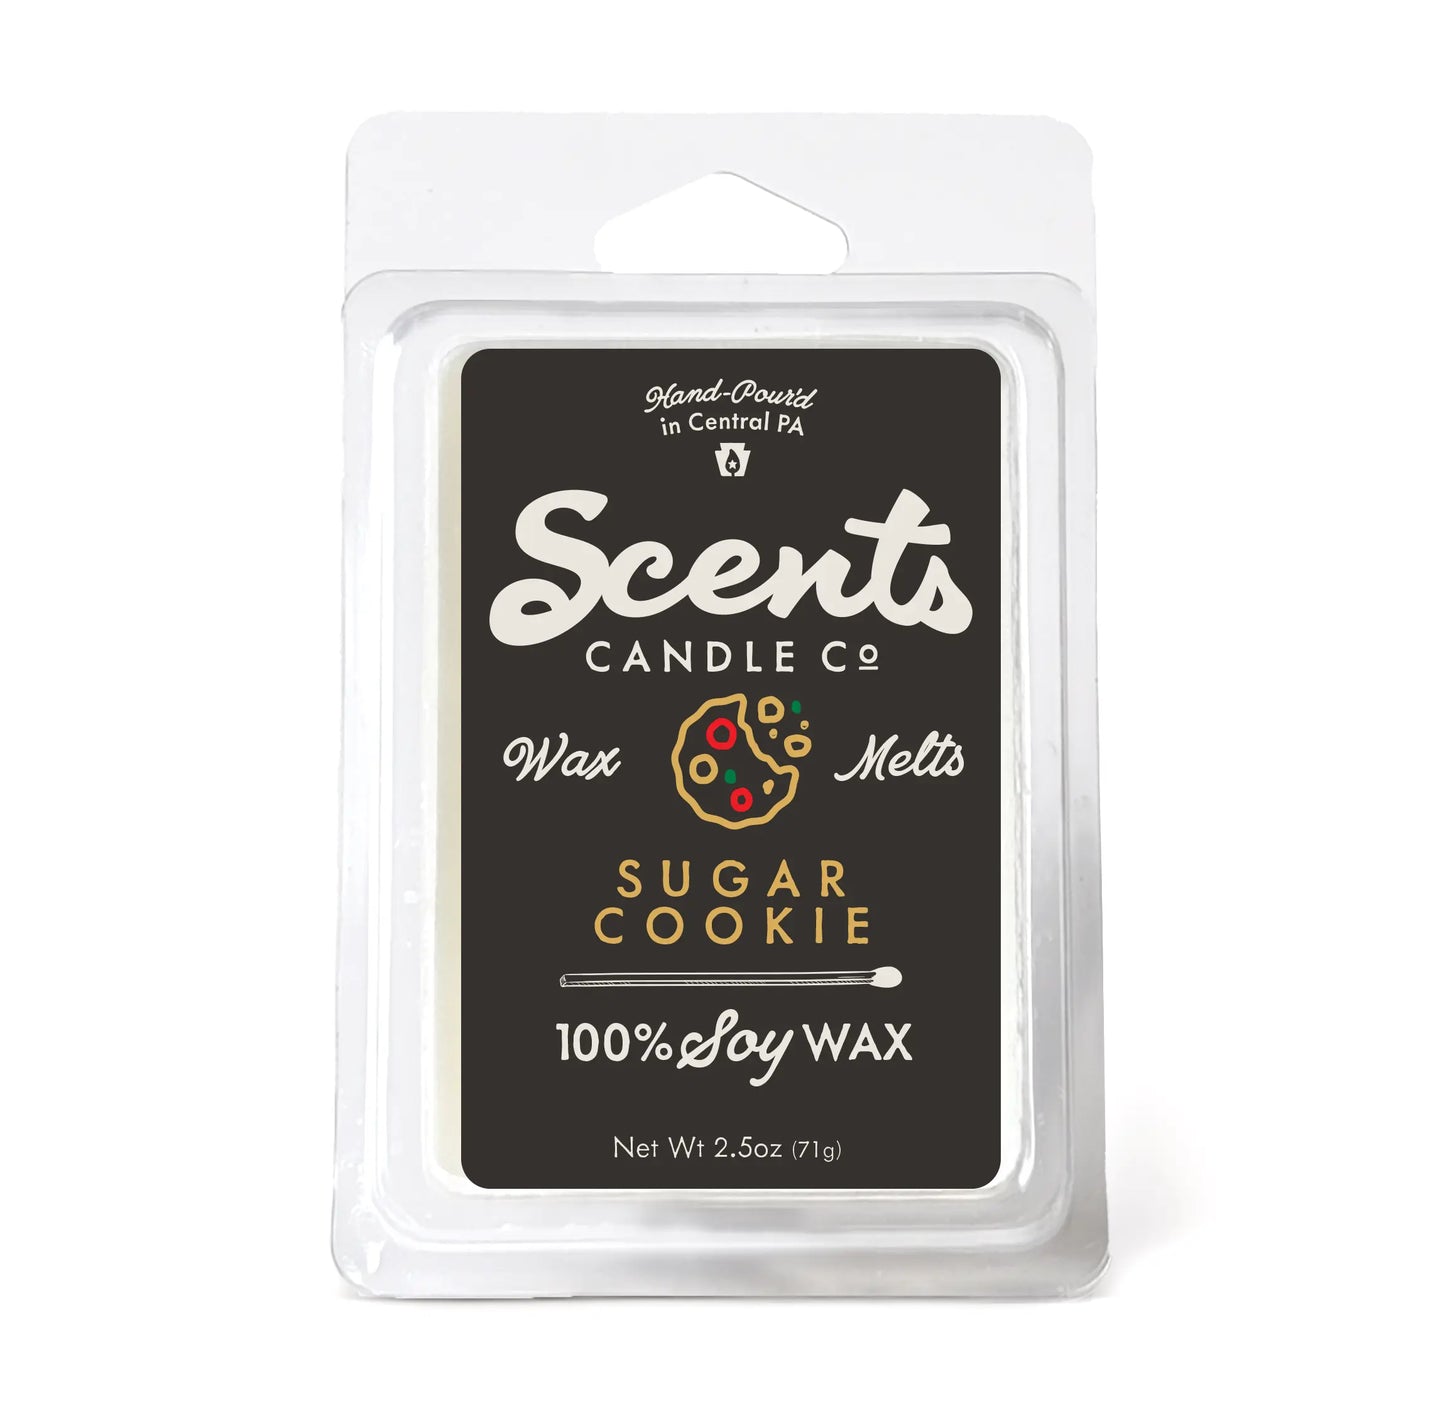 Scents Candle Co. Sugar Cookie Wax Melt